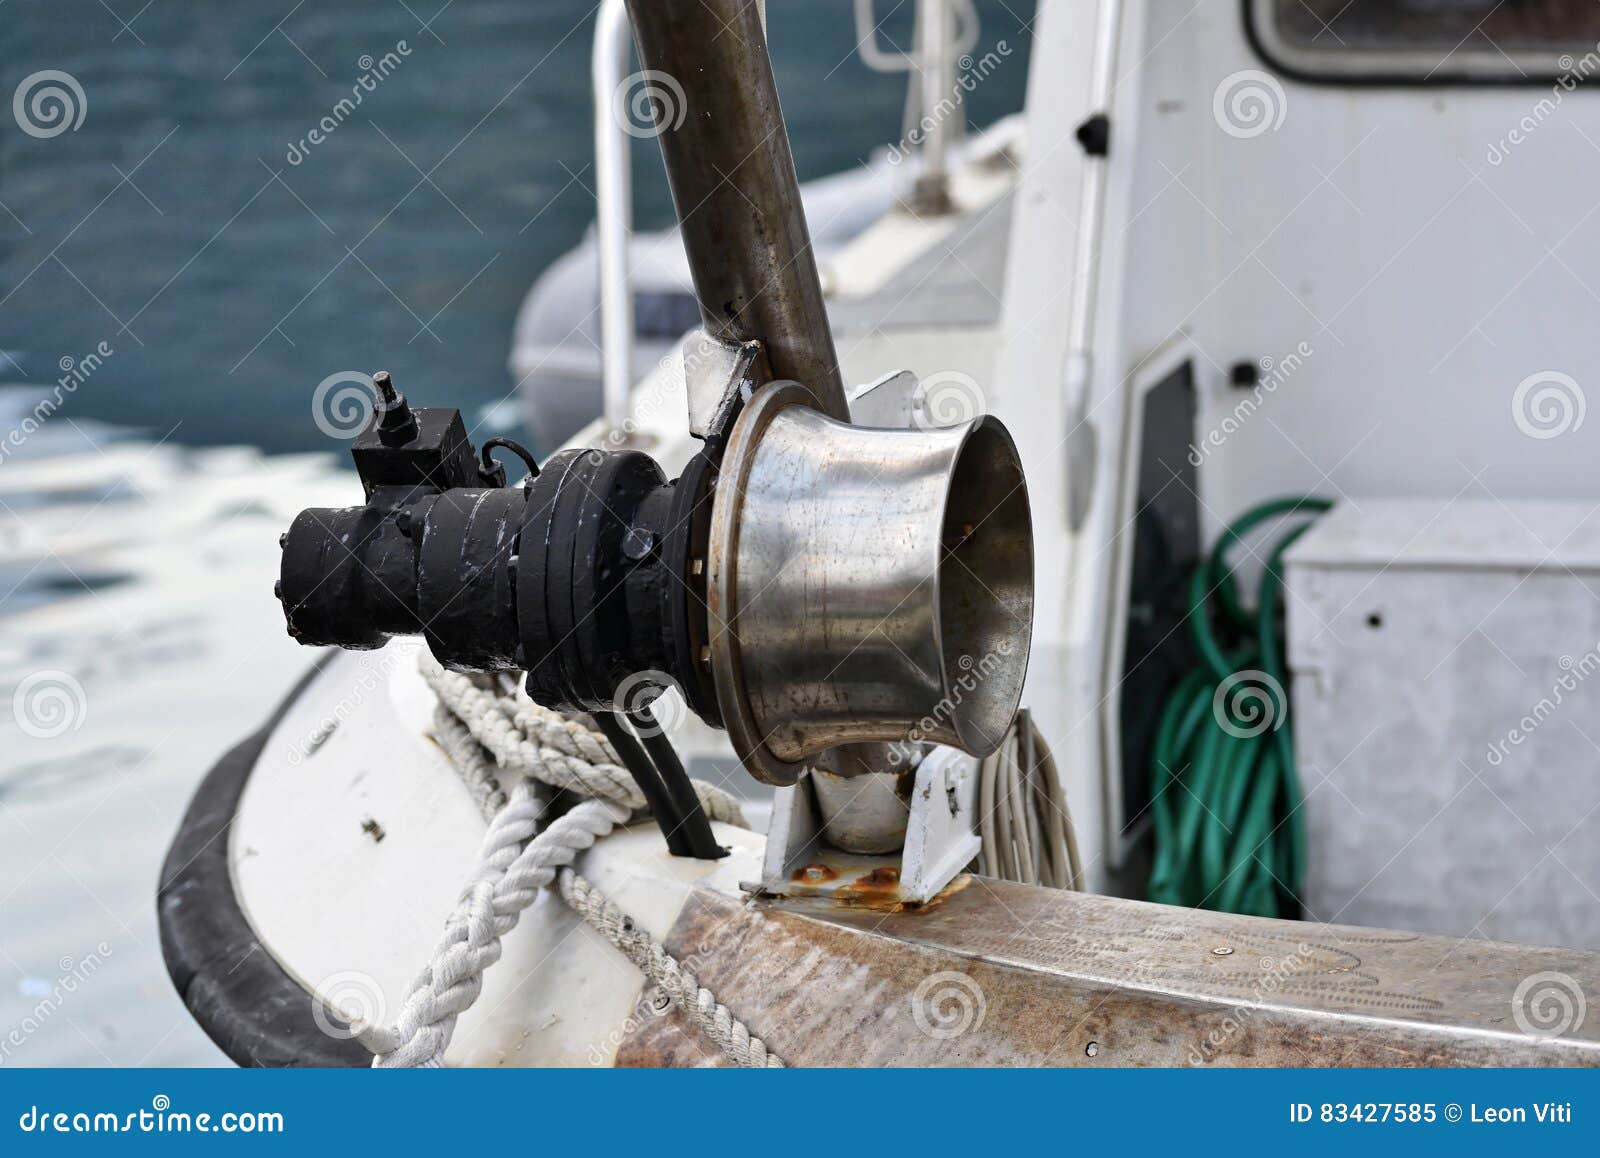 Detail of Winch on Fishing Boat Stock Image - Image of poop, cord: 83427585